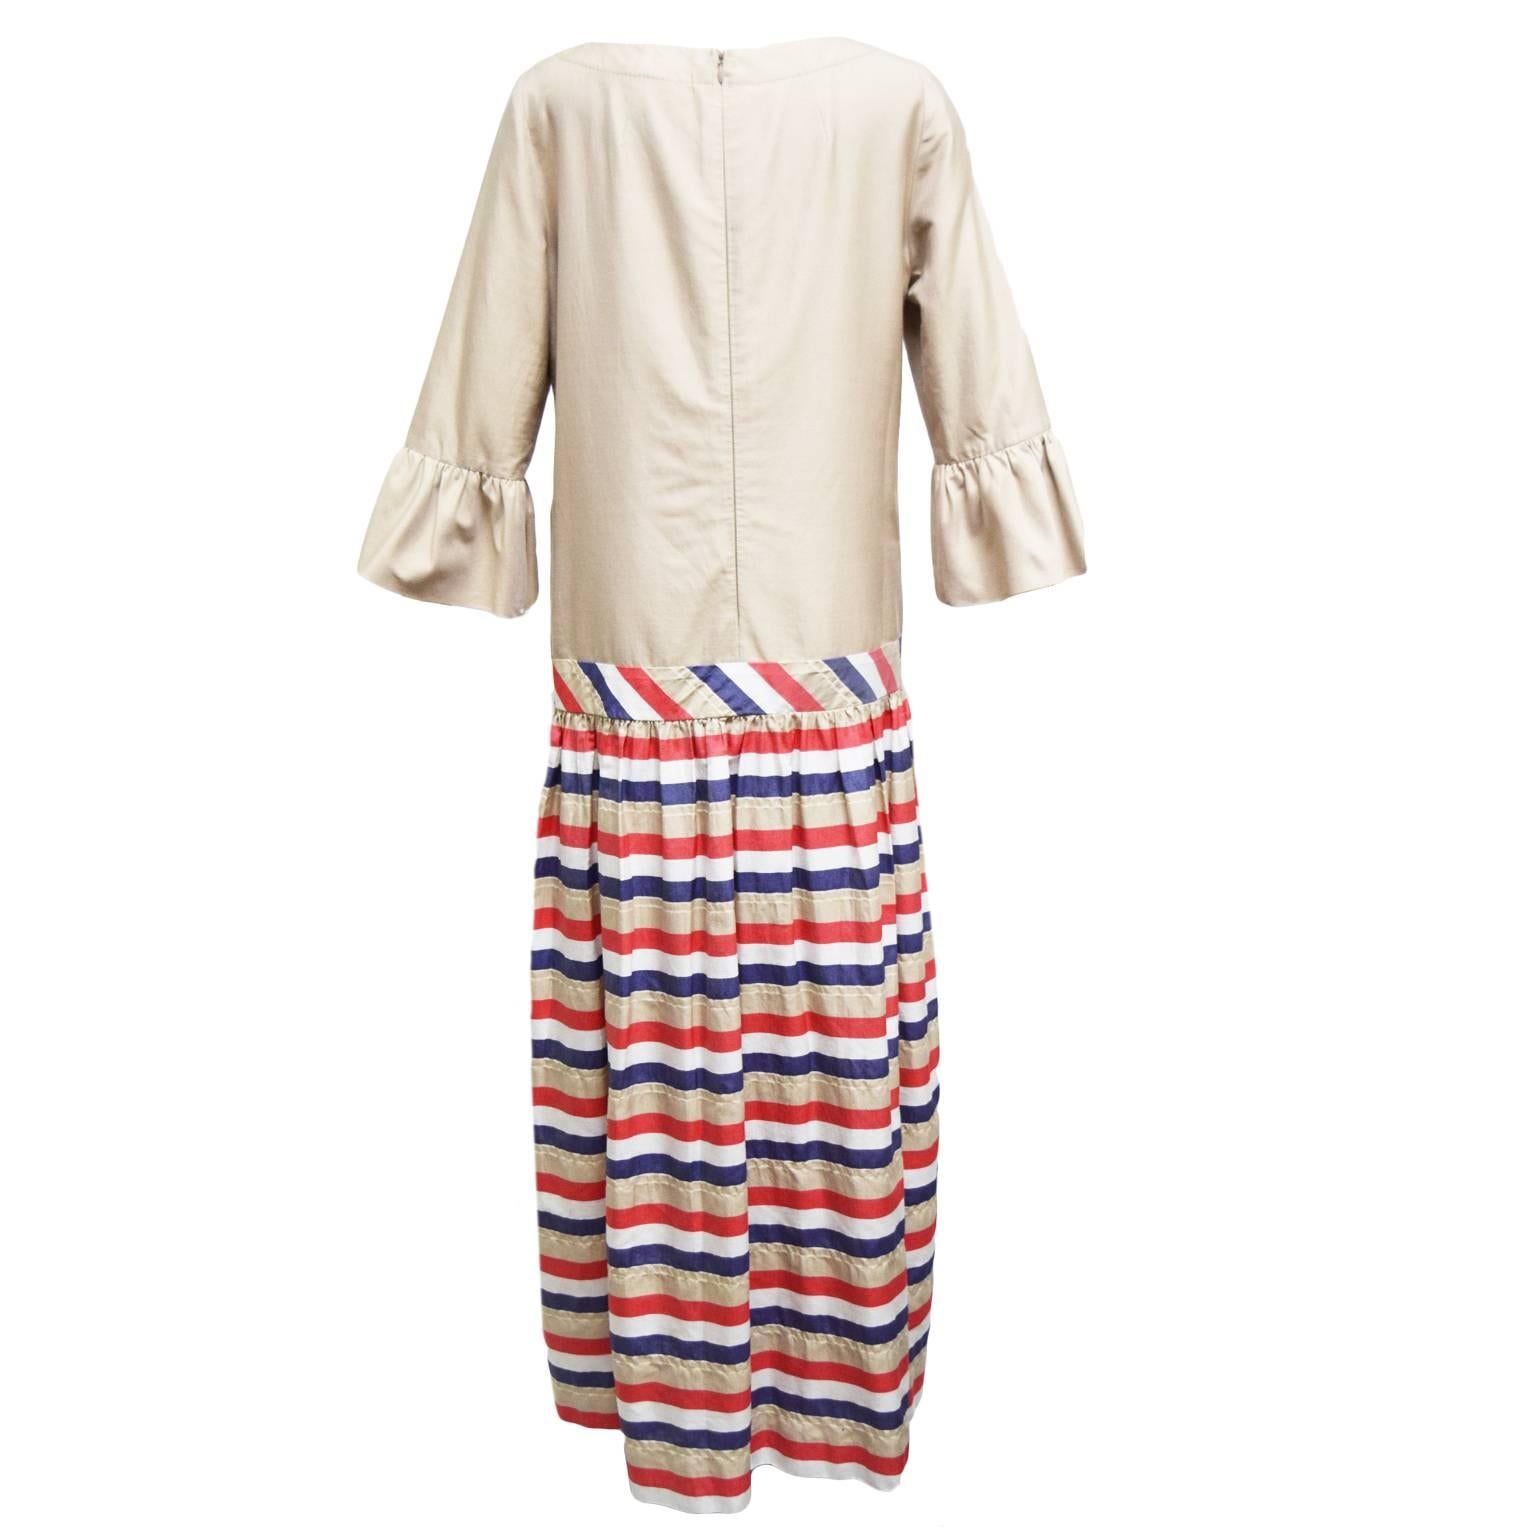 This dress by Algo is made from 100% rich cotton. The blouse of the dress is beige and has flared three quarter sleeves. The back is zipped and the skirt is striped and full, the length ends at the ankles.